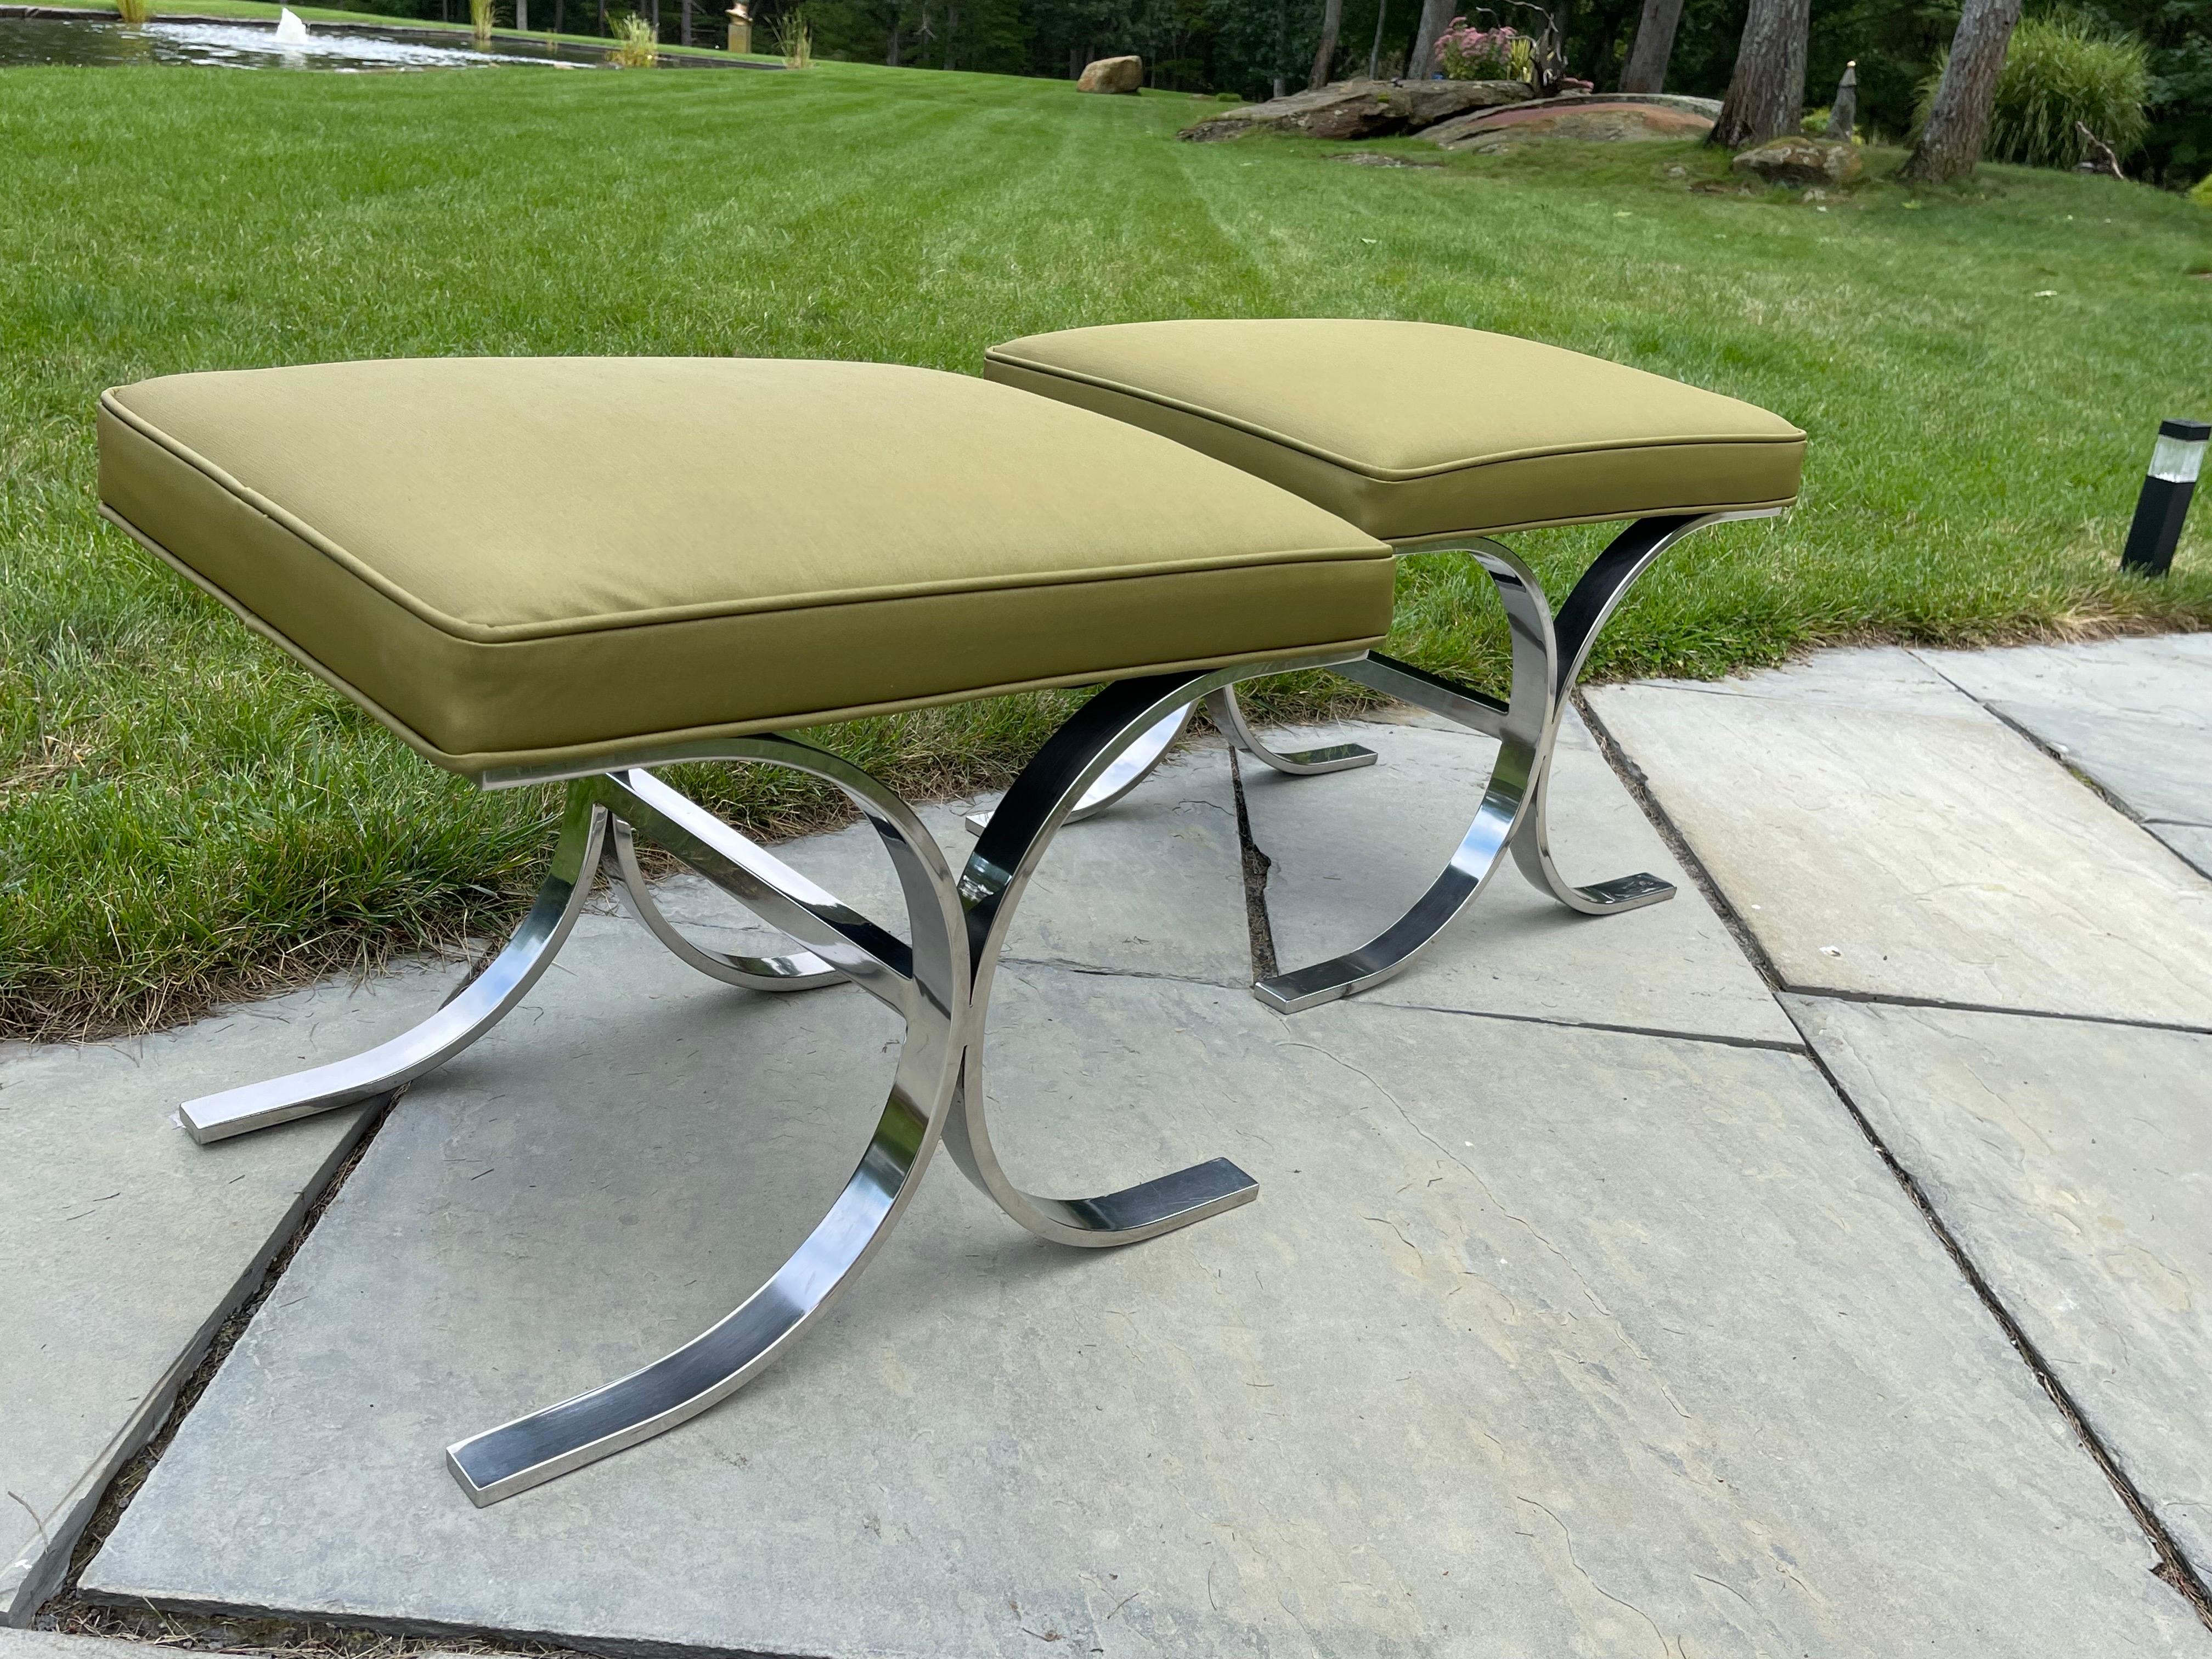 Inspired by Milo Baughman this pair of high quality Foot Stools is newly upholstered in a quality olive green fabric. 
The Cantilever heavy chrome x-shape legs are inspired by Milo Baughman’s work, a Pioneer of American Mid-Century Modern furniture.